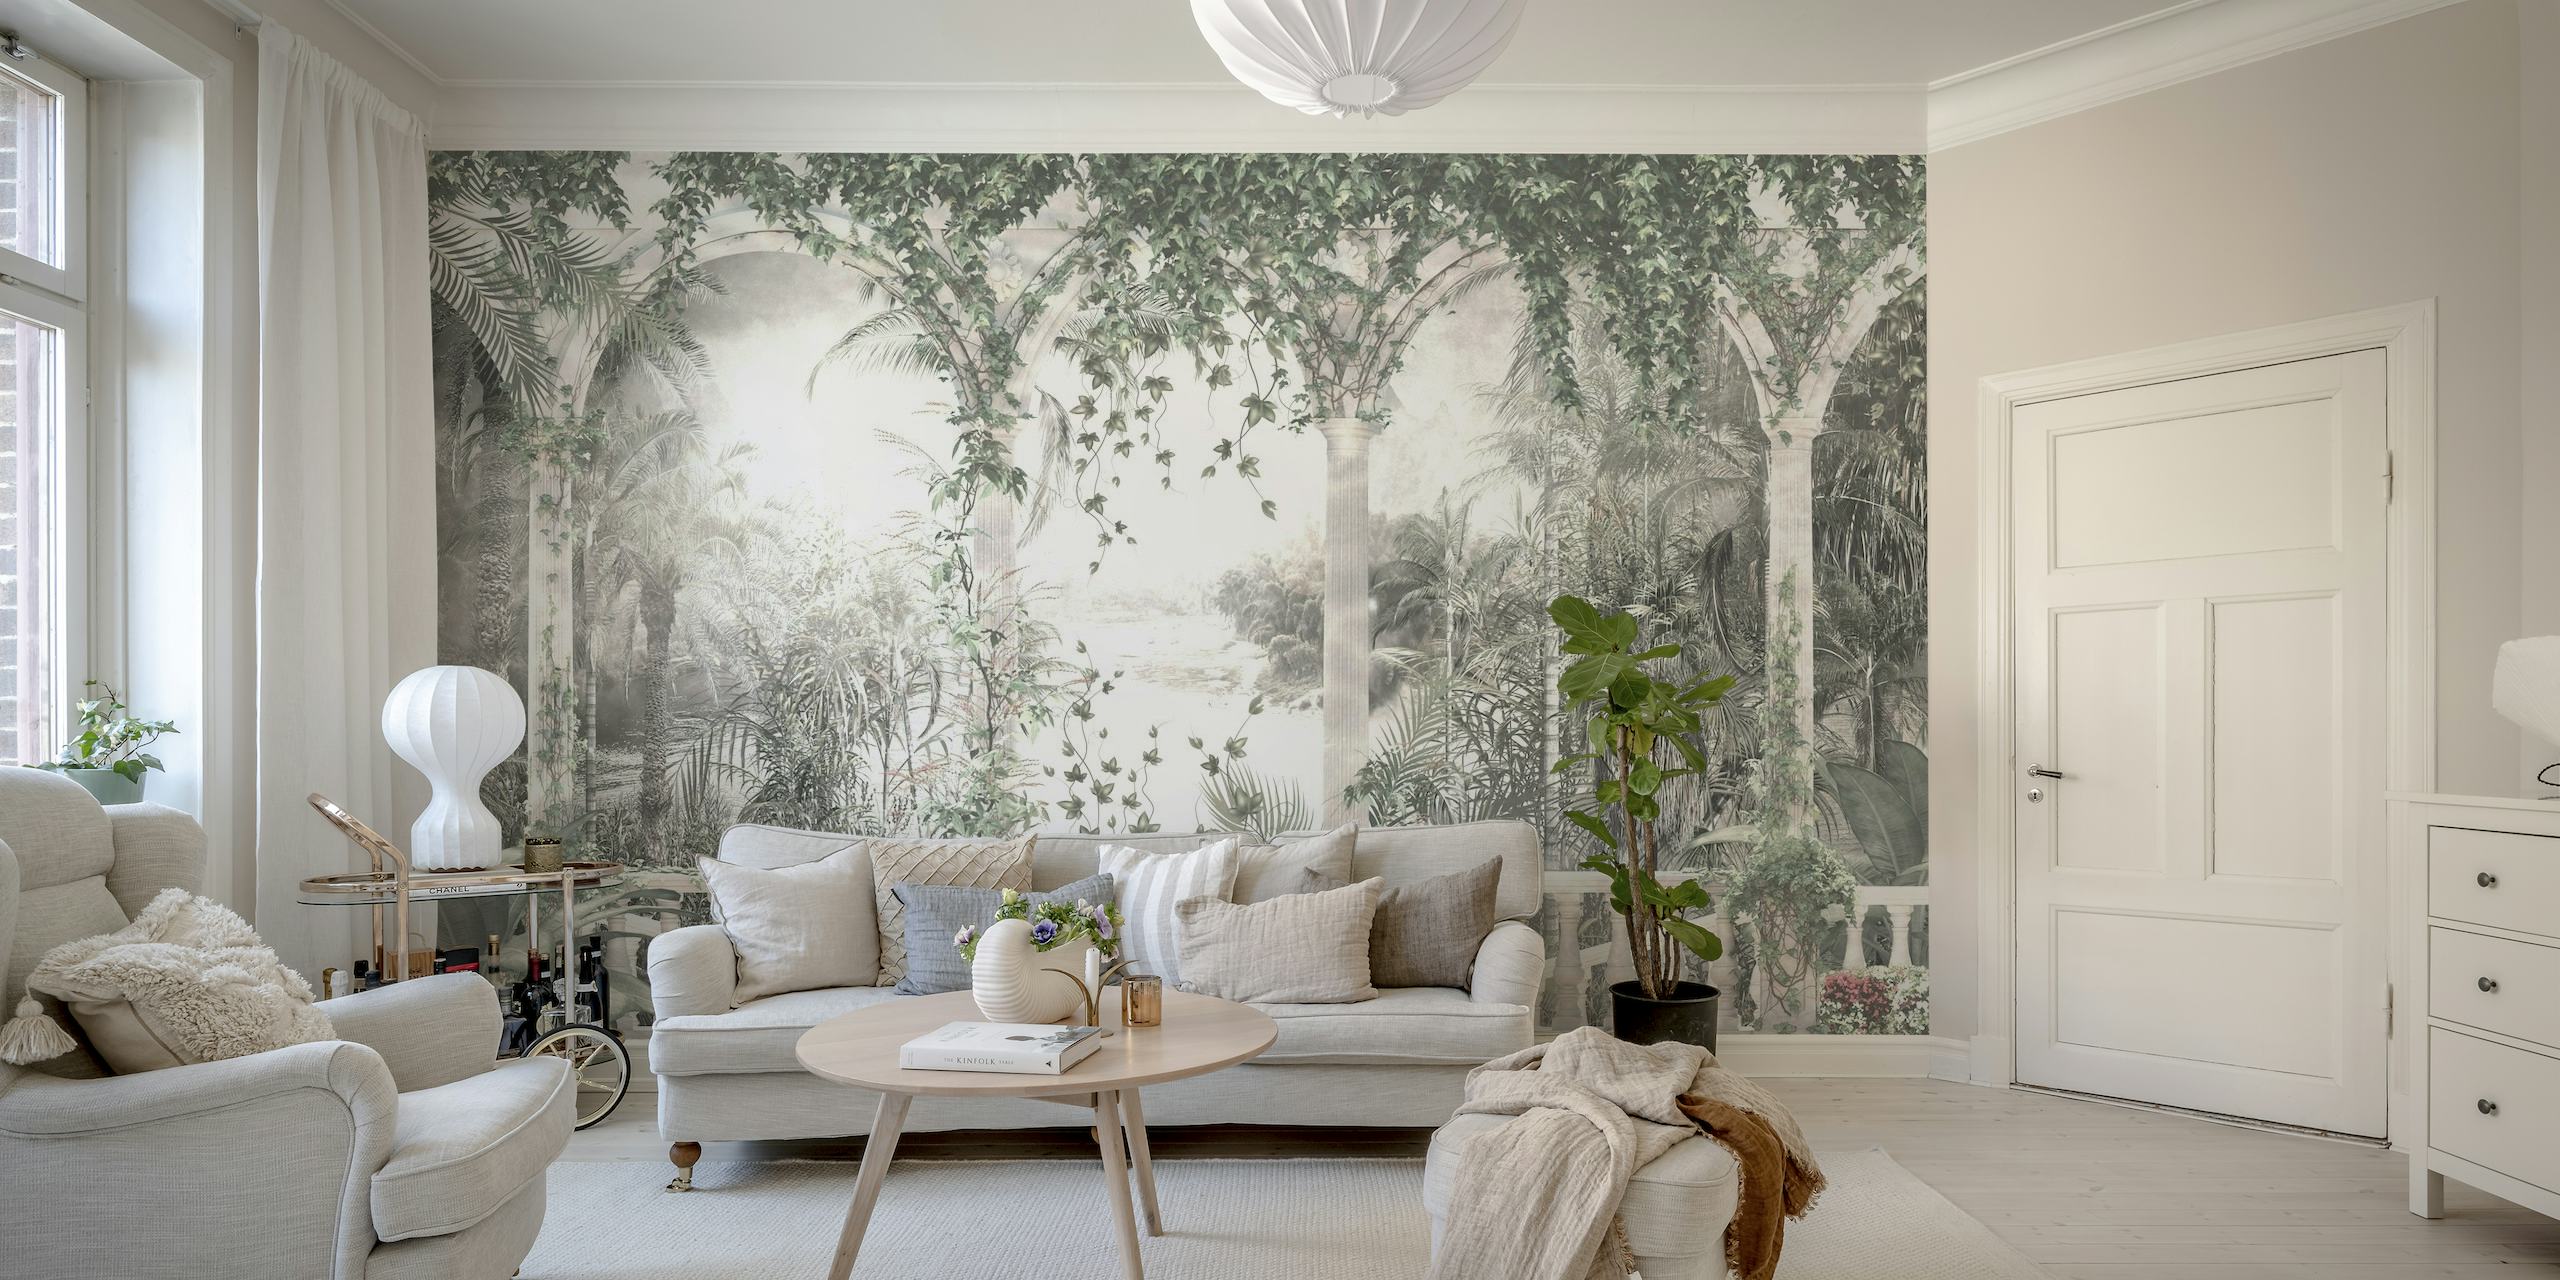 Tropical view wall mural with arching trees and a serene landscape